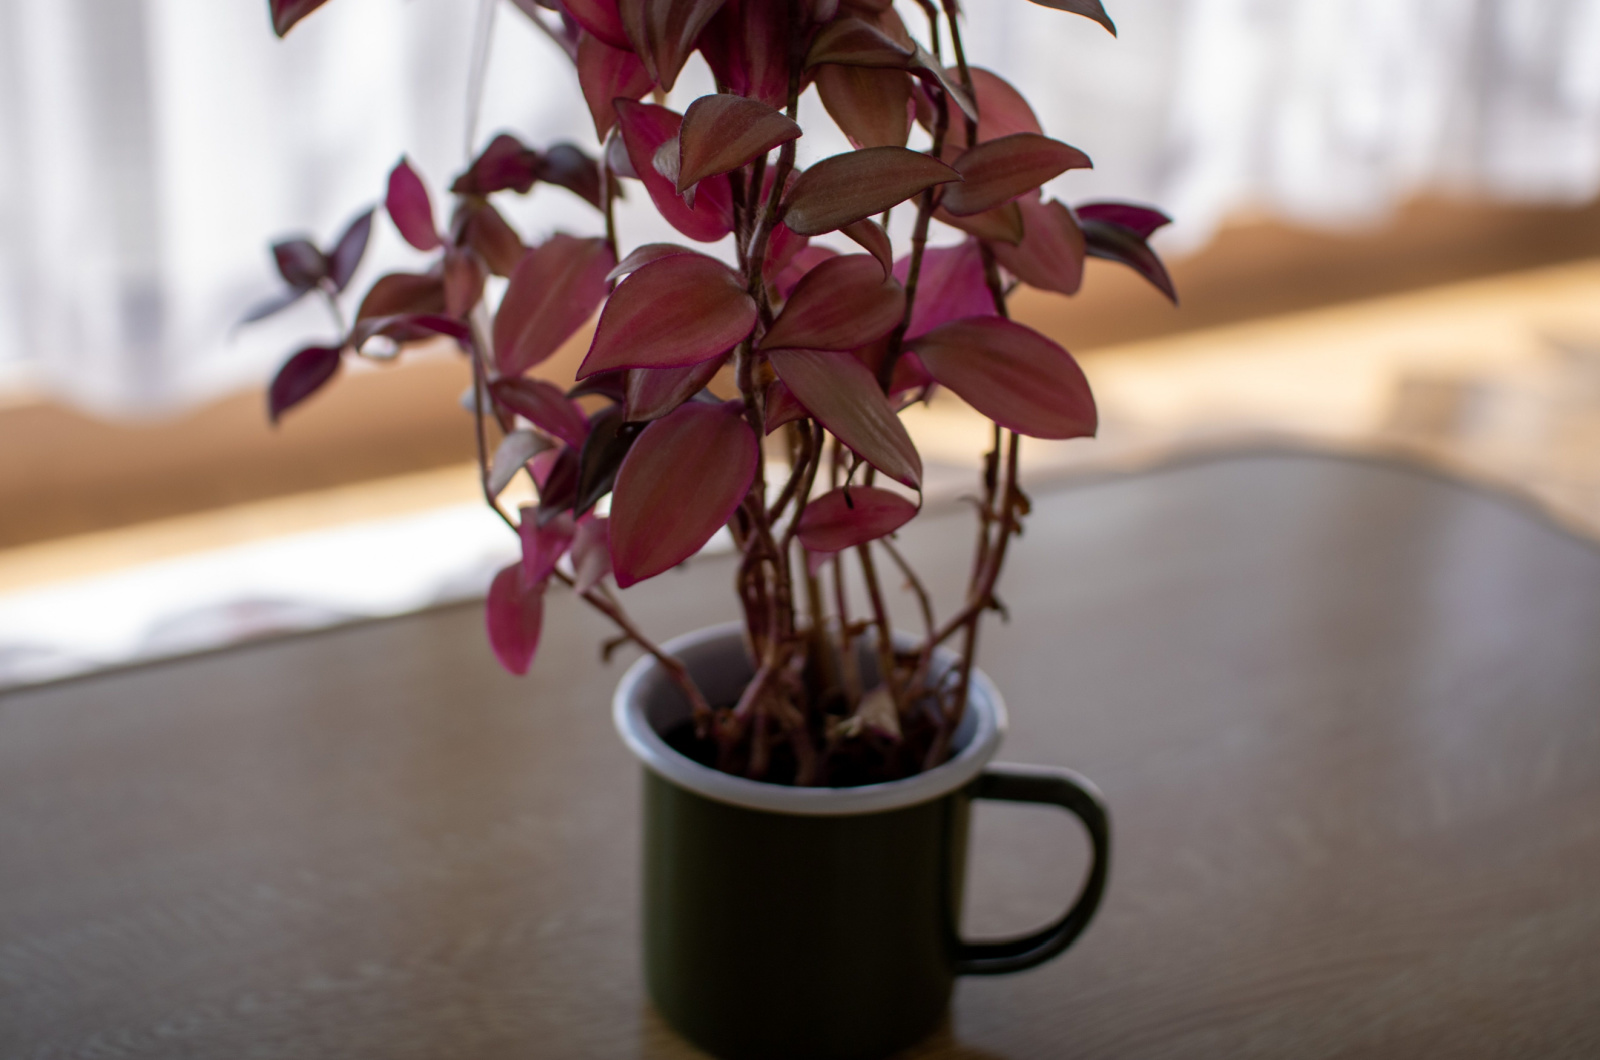 wandering jew plant growing in a small cup